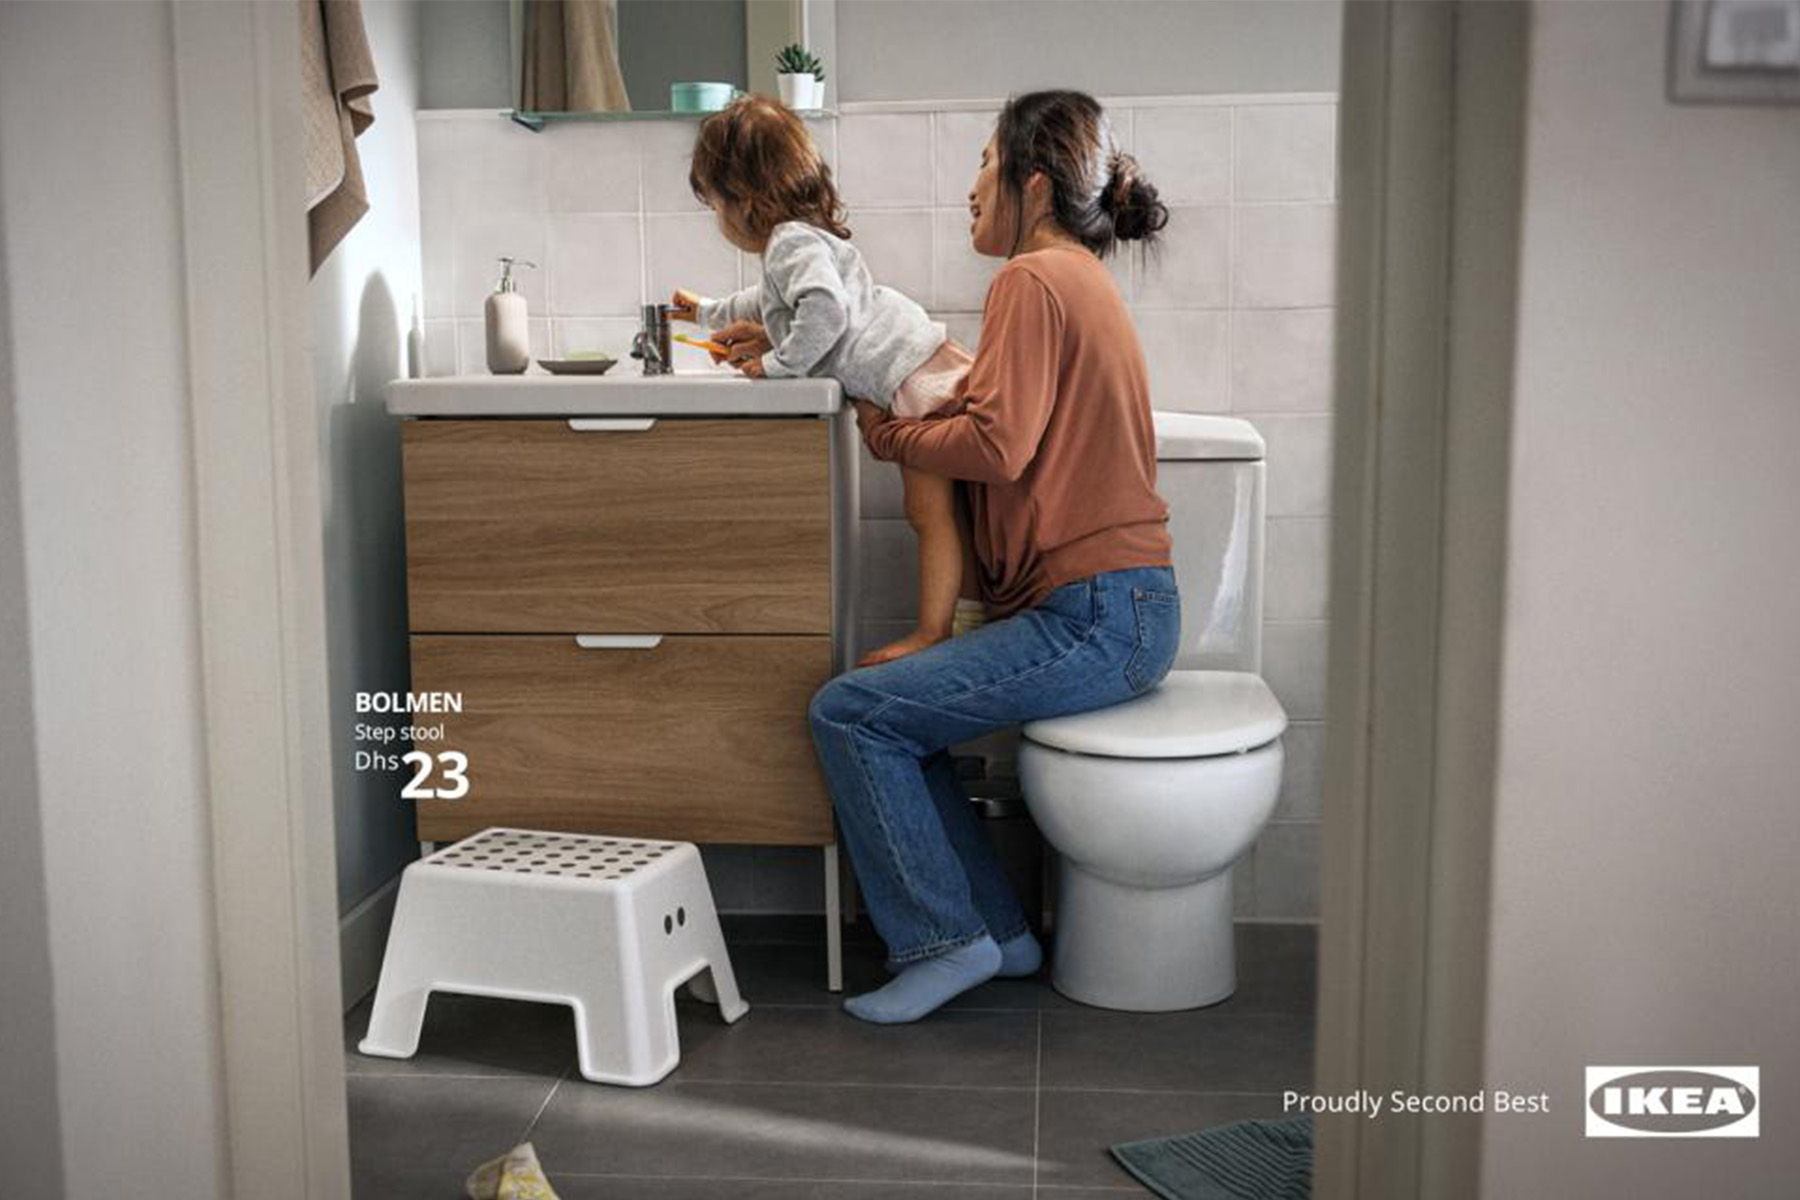 Mother helping child wash hands and IKEA BLUMEN step stool 